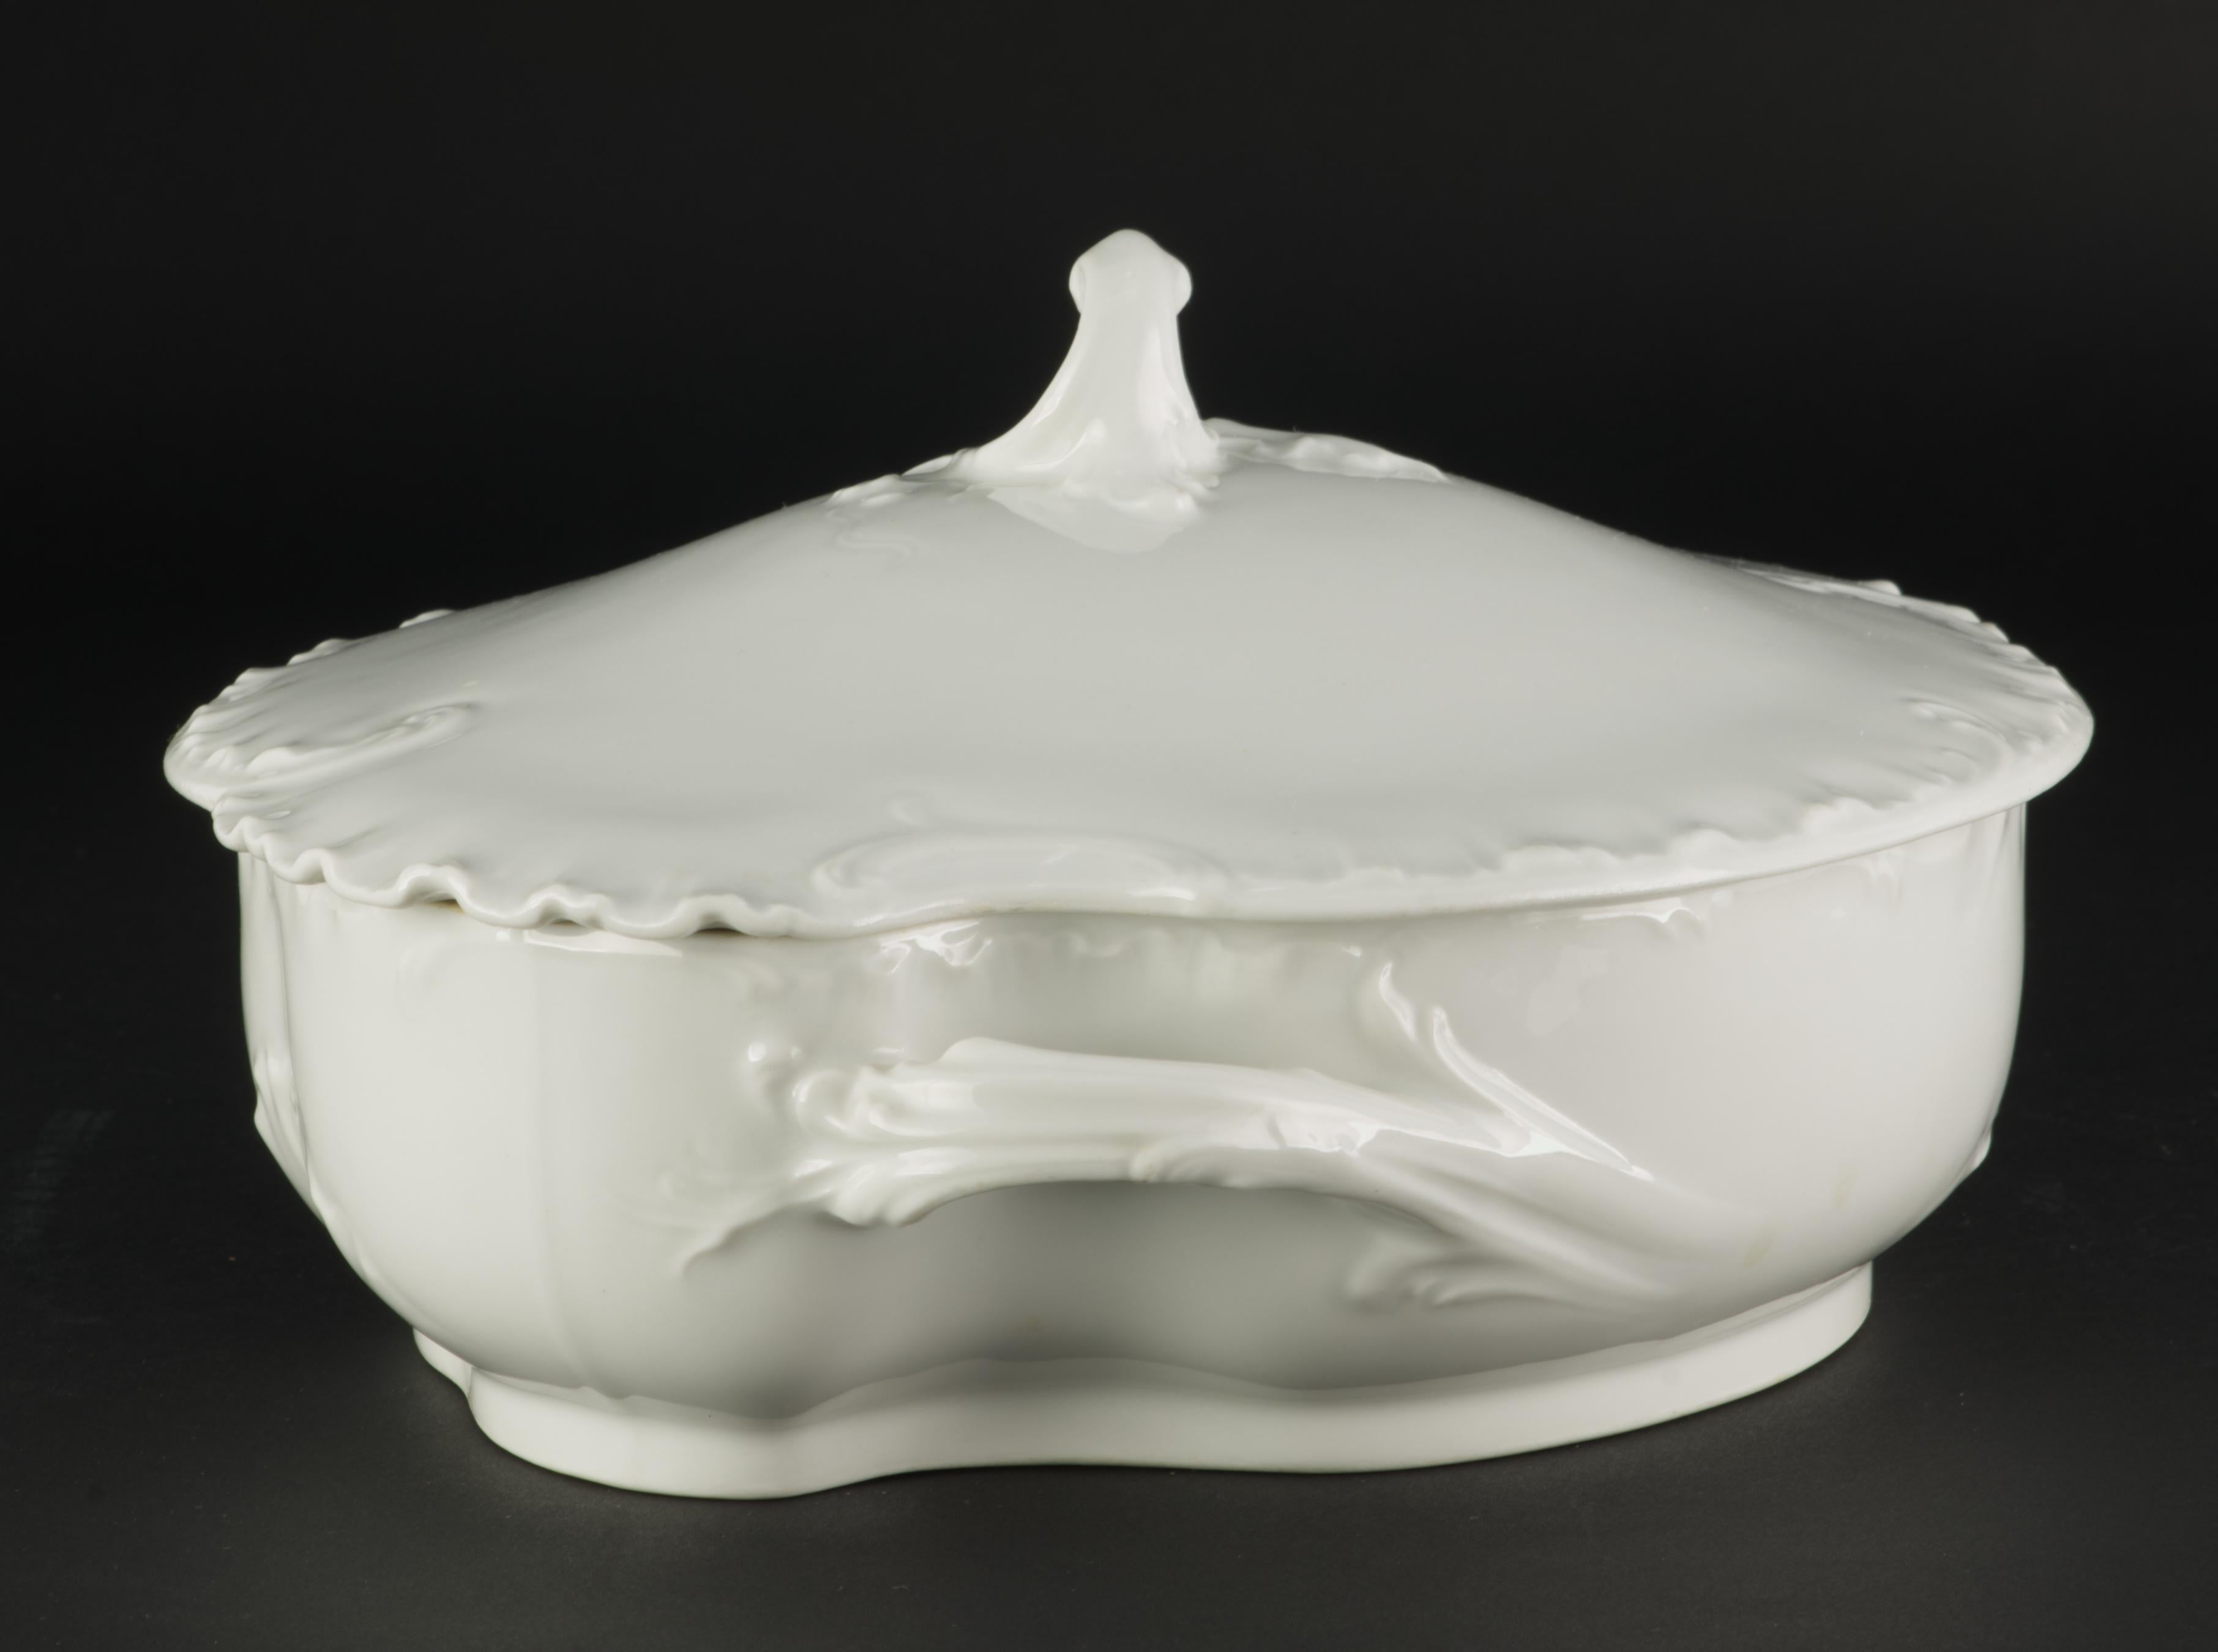 French Haviland Limoges Oval Marseille Bowl with Cover, White Porcelain, 1894-1931 For Sale